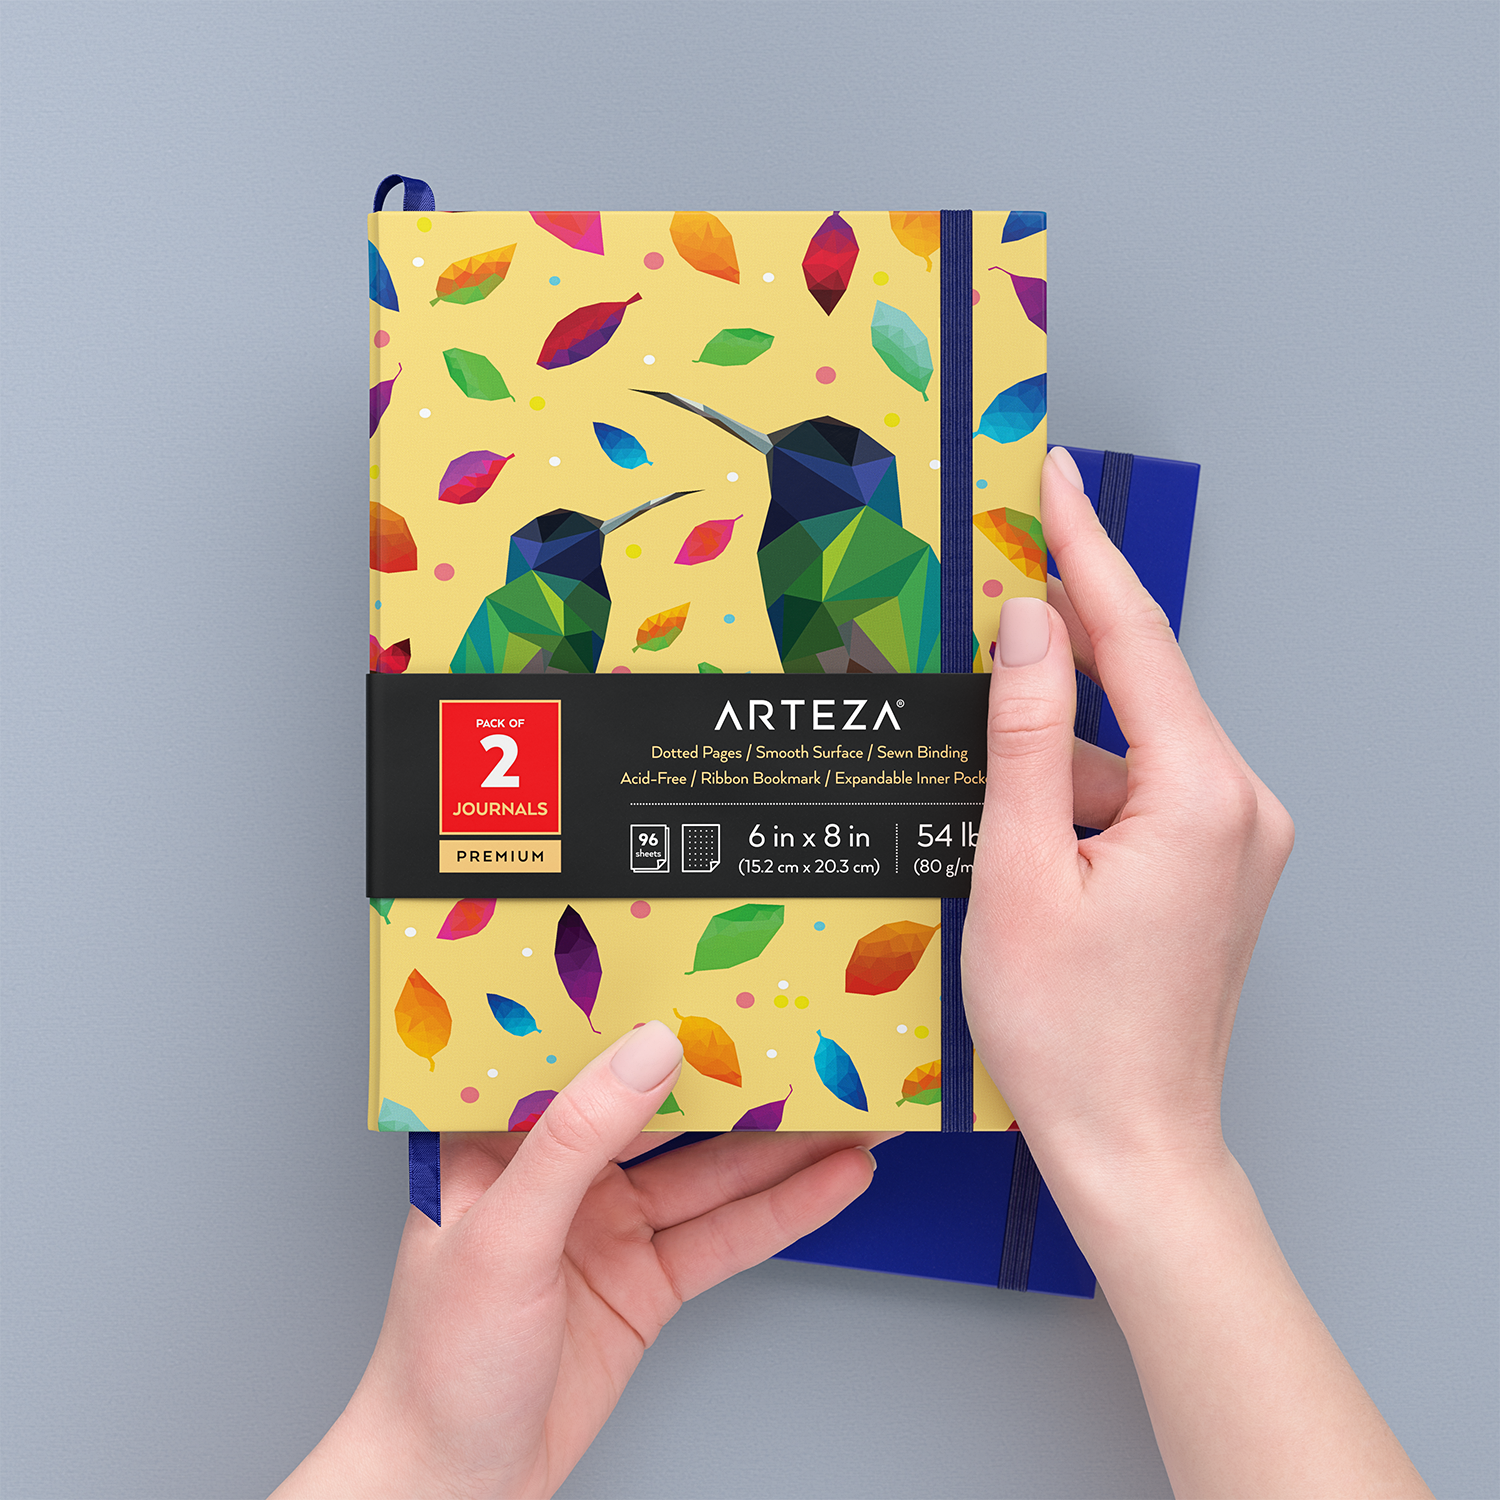 Arteza Journal Gift Set, Pack of 2, 6x8 Inches,70-Sheet Notebooks with Double-Sided Lined and Dotted Paper, Journal Holder, and 1 Black Ink Pen, Offic